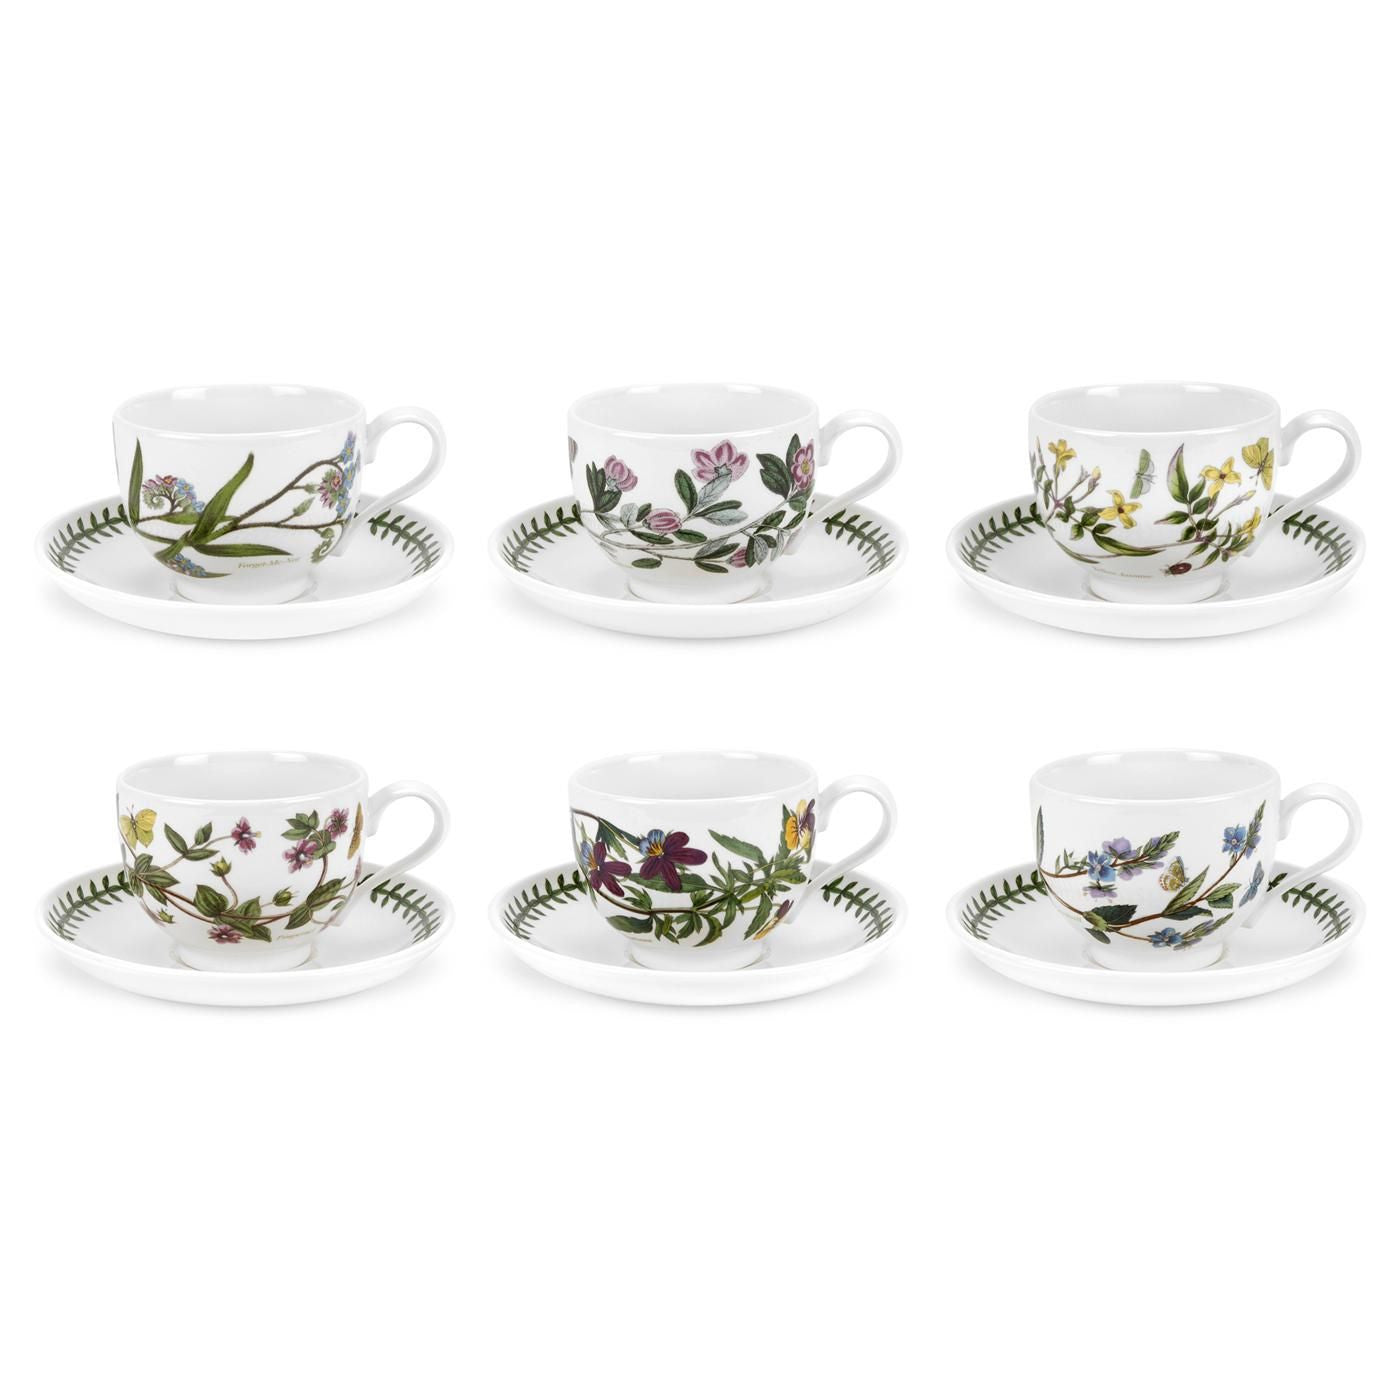 Portmeirion Botanic Garden Set of 6 Breakfast cups and saucers, assorted decorations